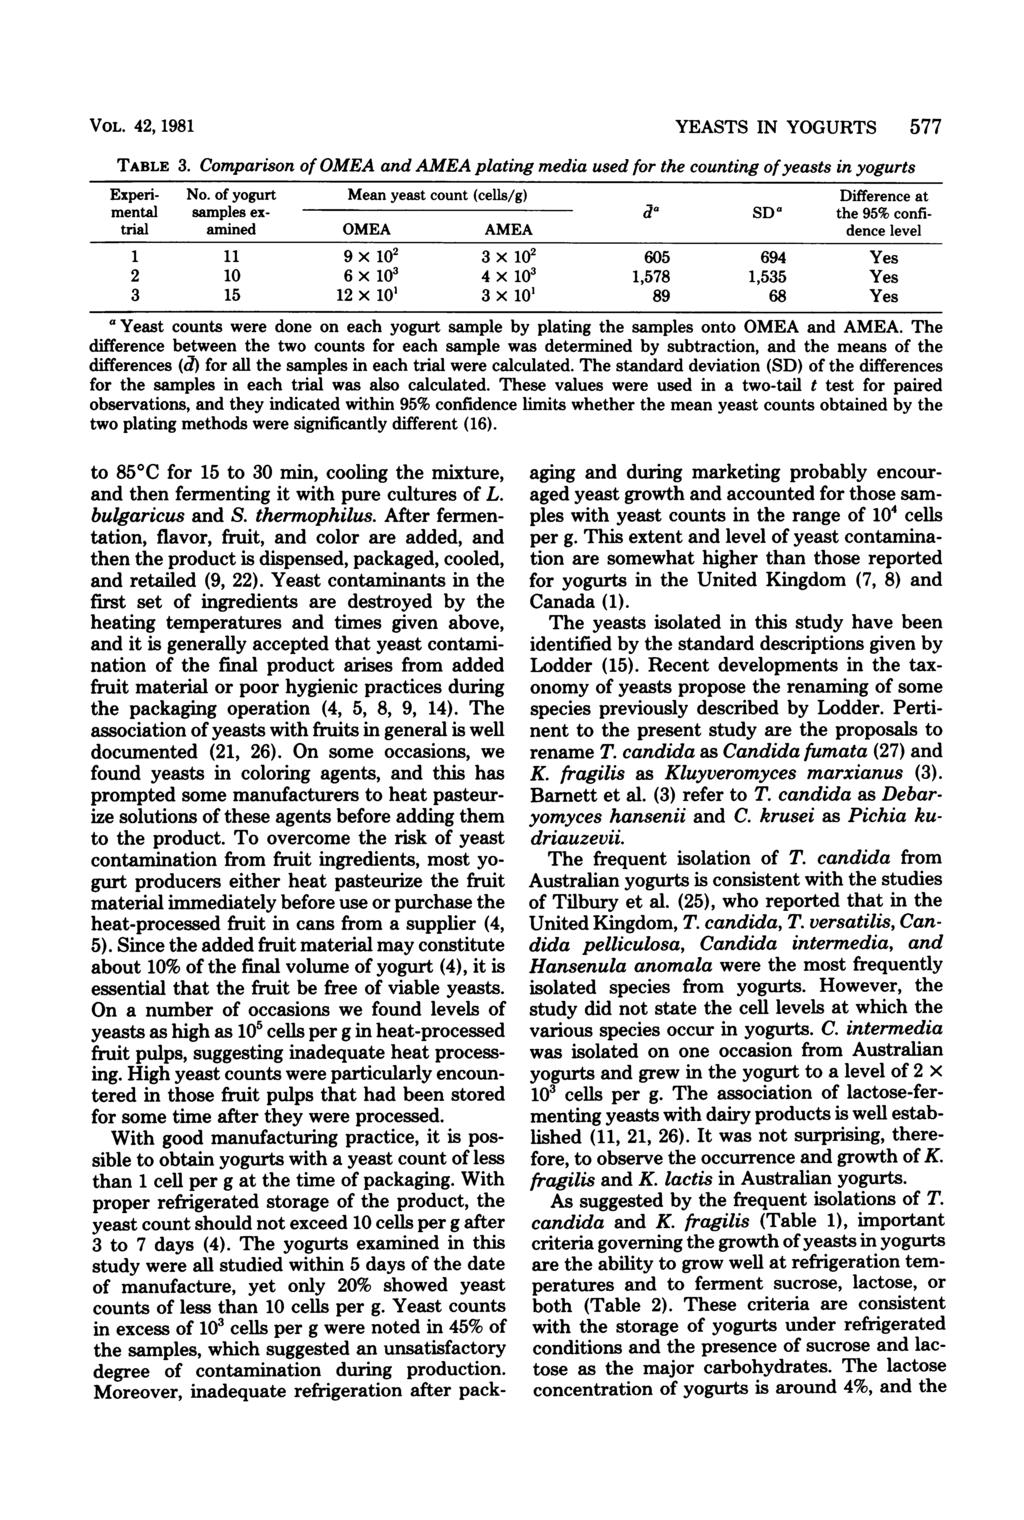 VOL. 42, 1981 YEASTS IN YOGURTS 577 TABLE 3. Comparison of OMEA and AMEA plating media used for the counting ofyeasts in yogurts Experi- No.